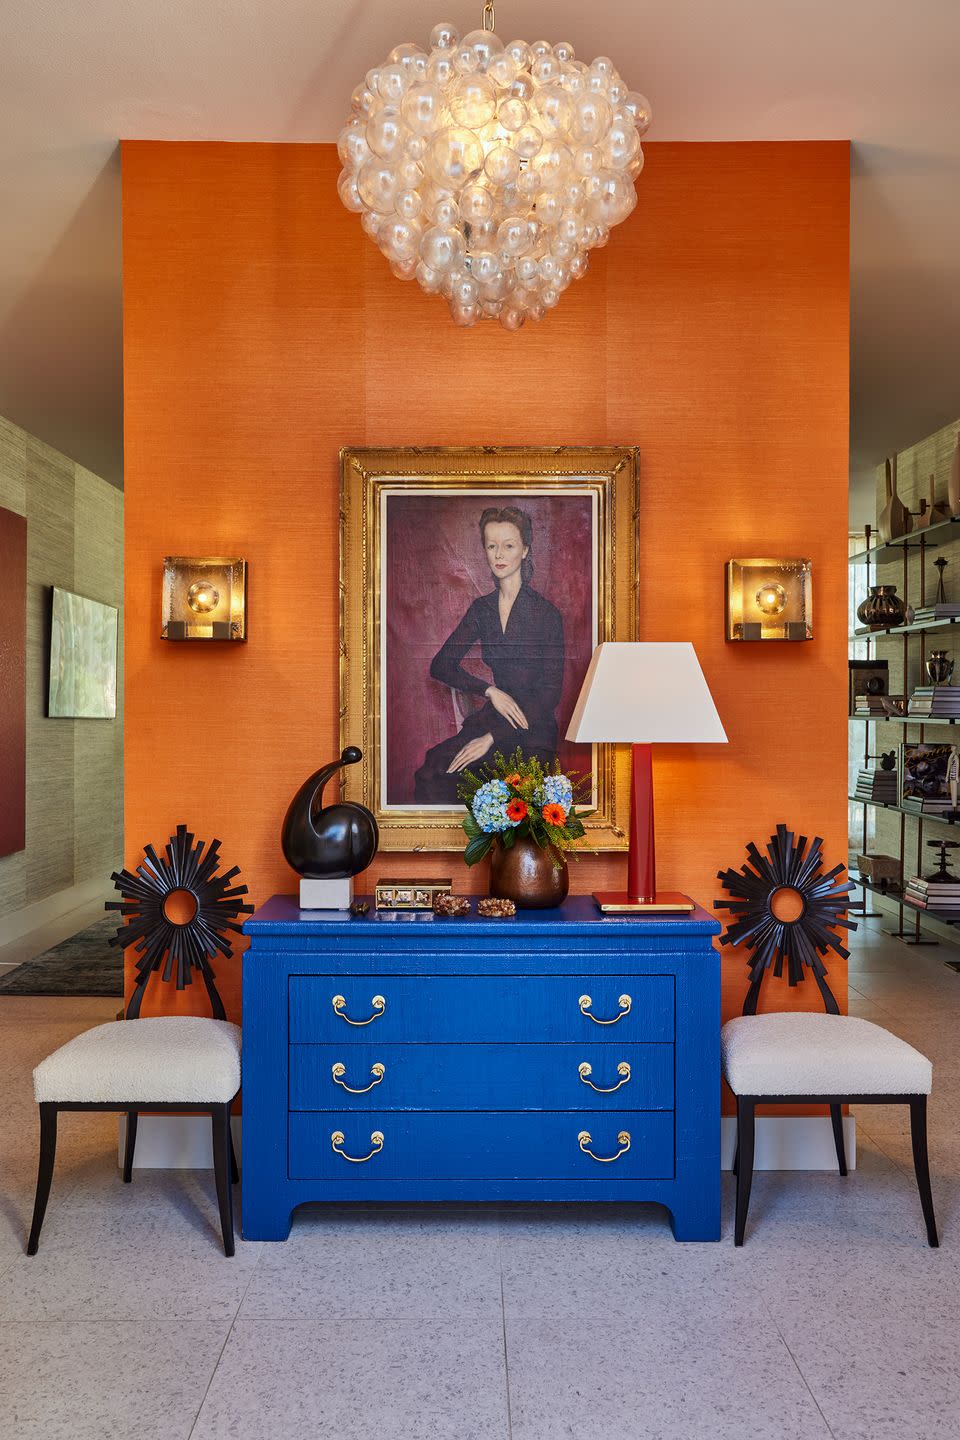 foyer with blue dresser and painting on an orange wall